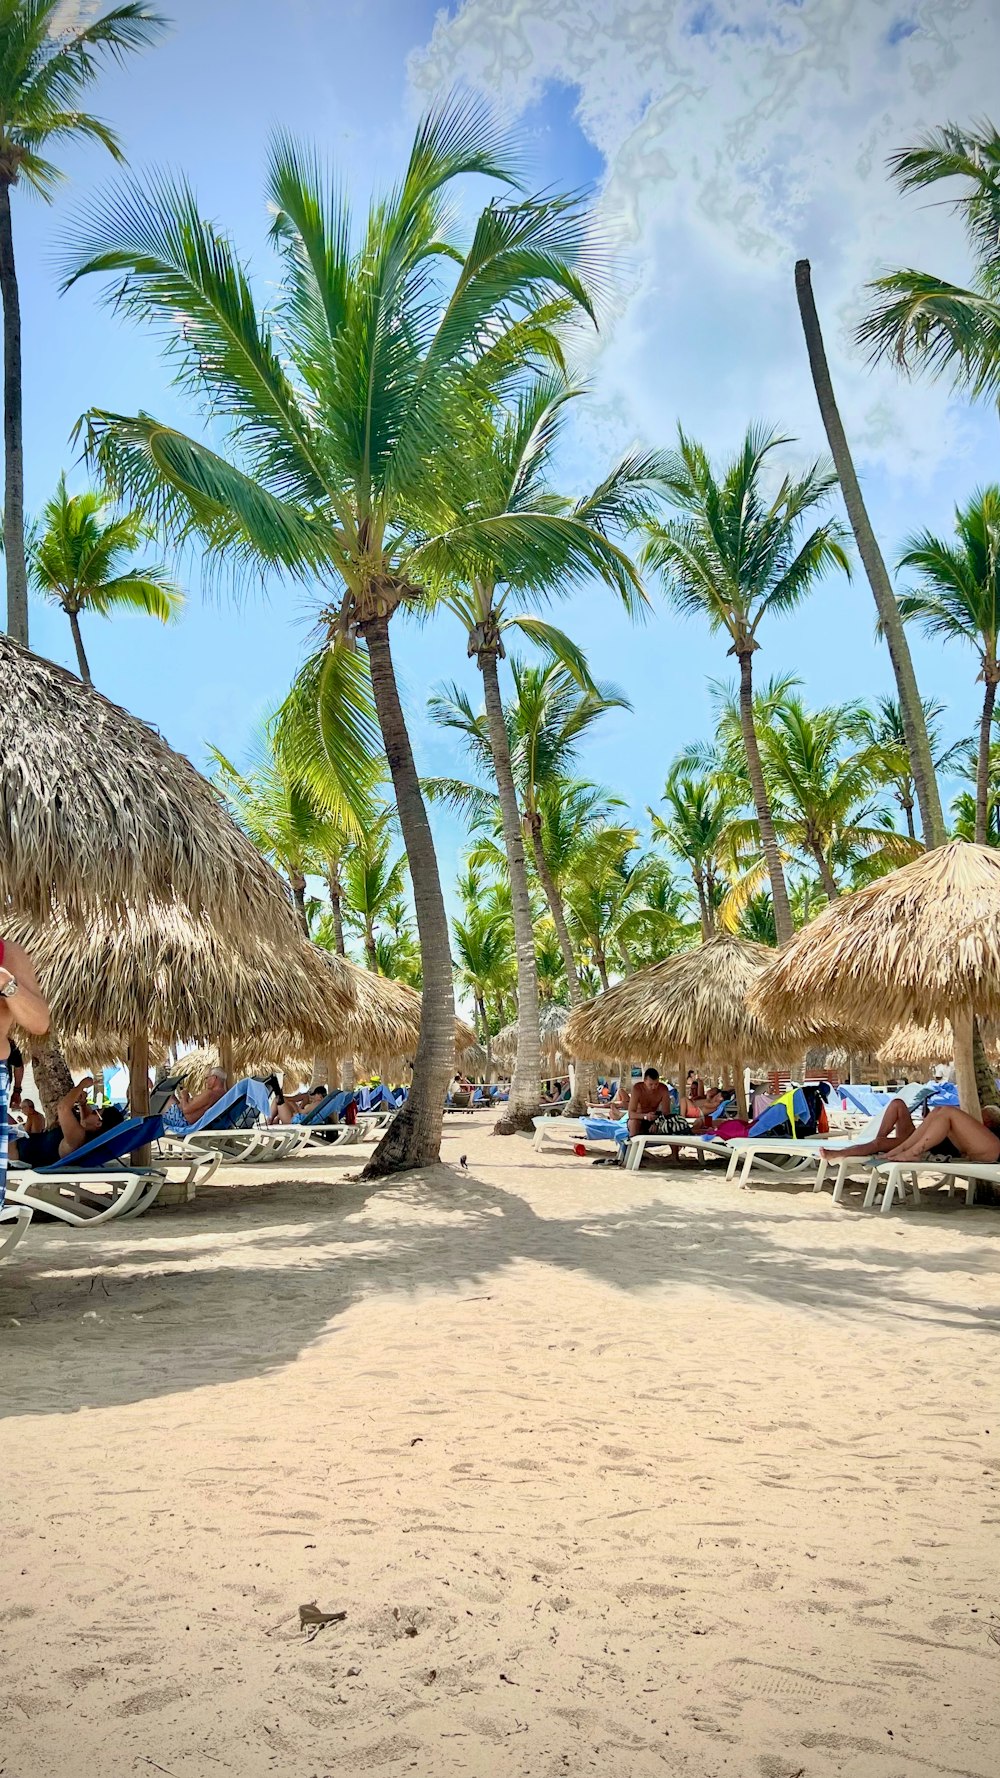 a sandy beach with palm trees and lawn chairs